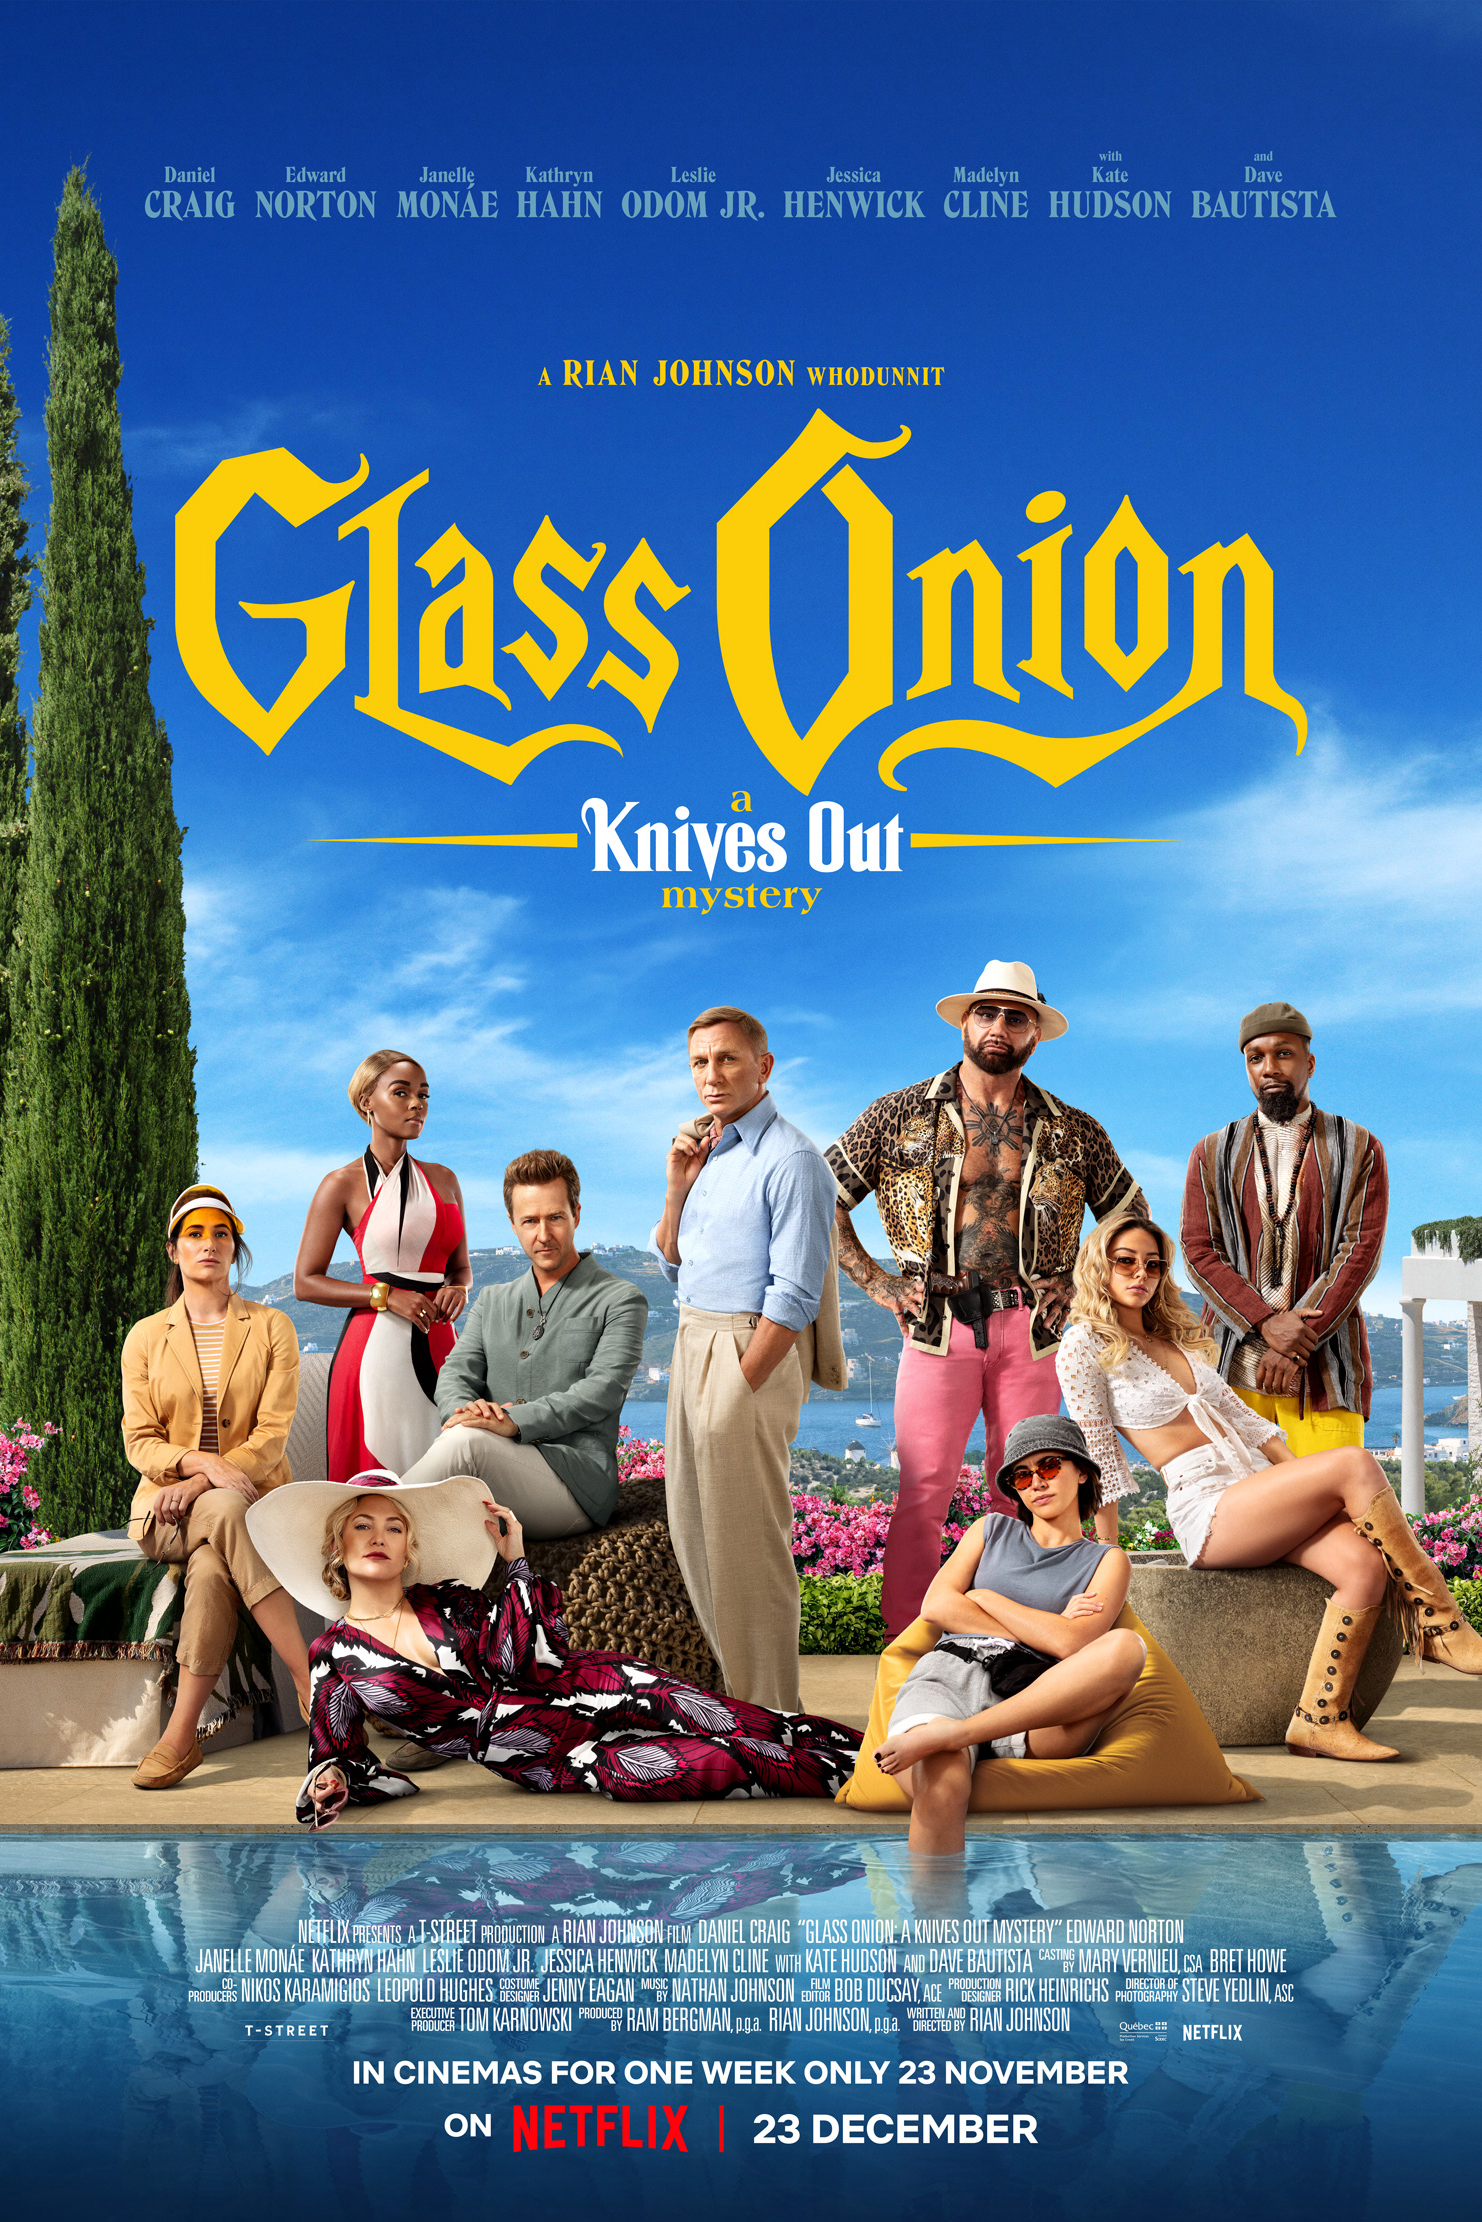 Download Glass Onion A Knives Out Mystery (2022) Dual Audio Hindi ORG Netflix WEB DL Full Movie 1080p [3.0GB] | 720p [1.2GB] | 480p [500MB] download